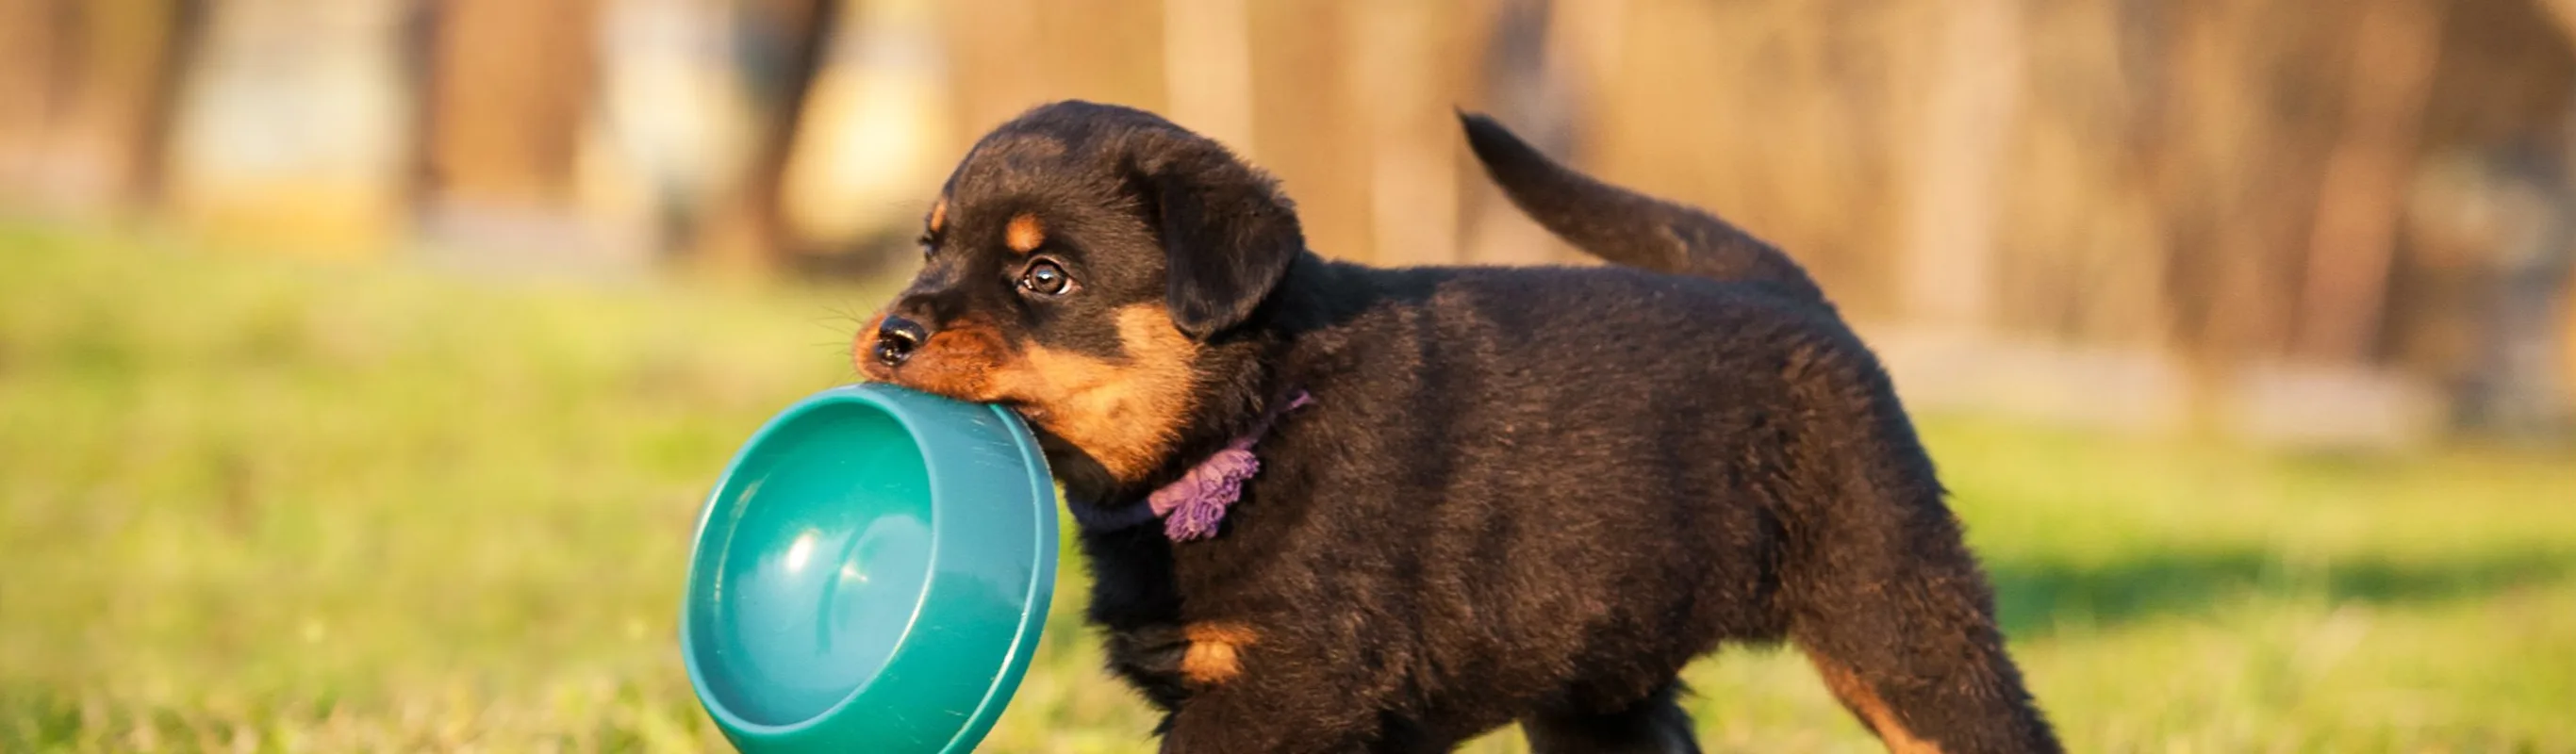 A small brown dog outside in the grass carrying a food bowl in its mouth